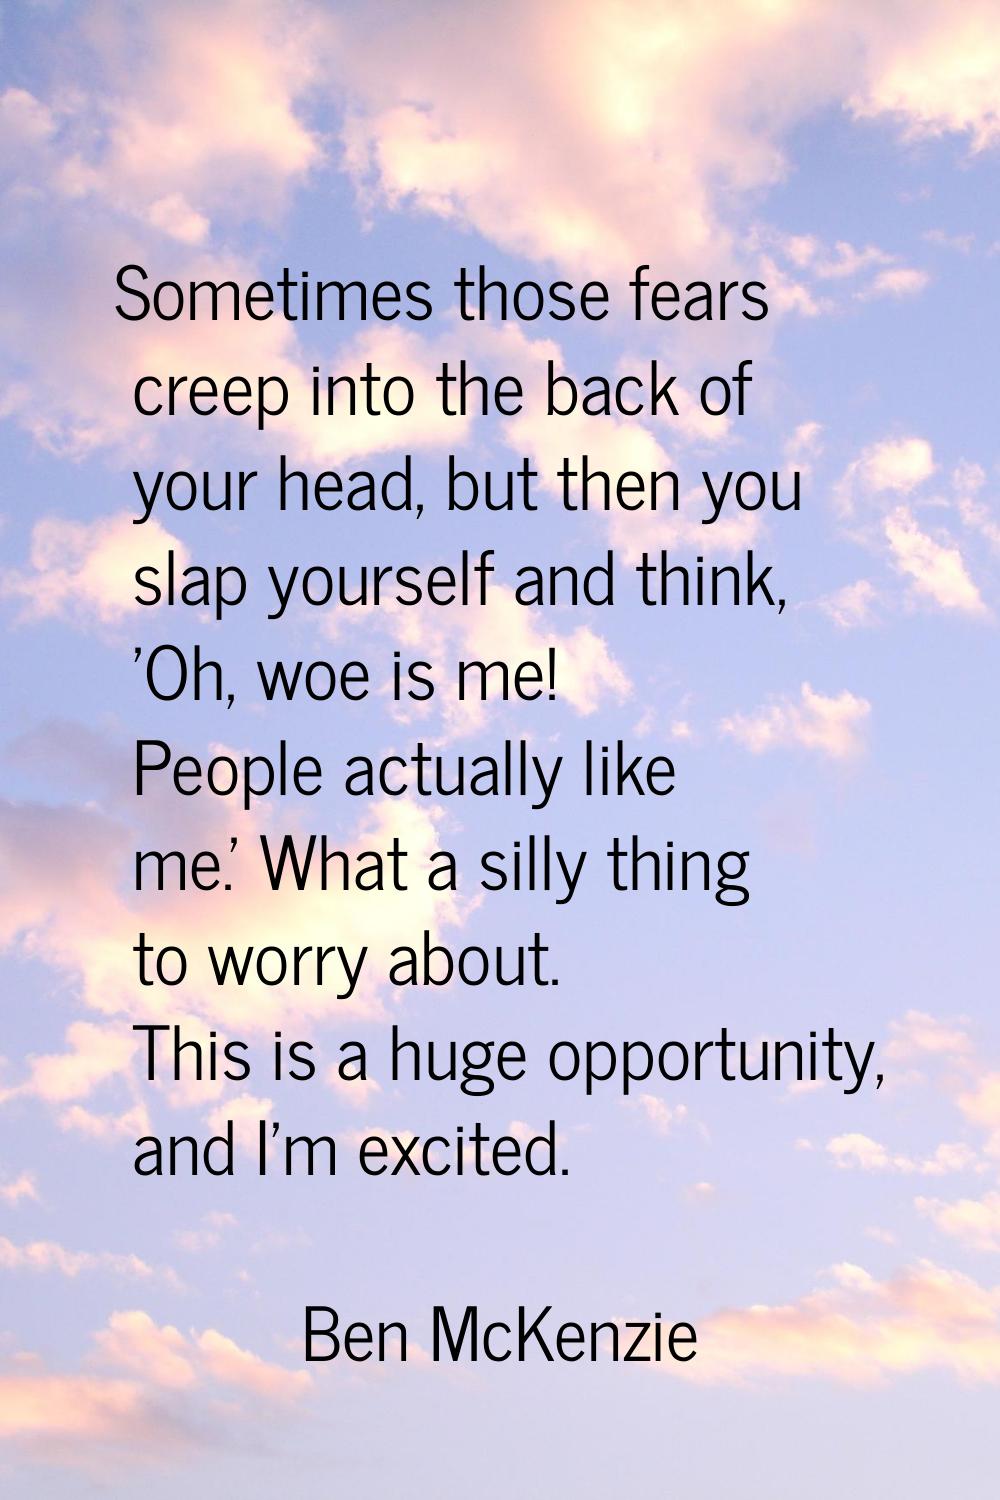 Sometimes those fears creep into the back of your head, but then you slap yourself and think, 'Oh, 